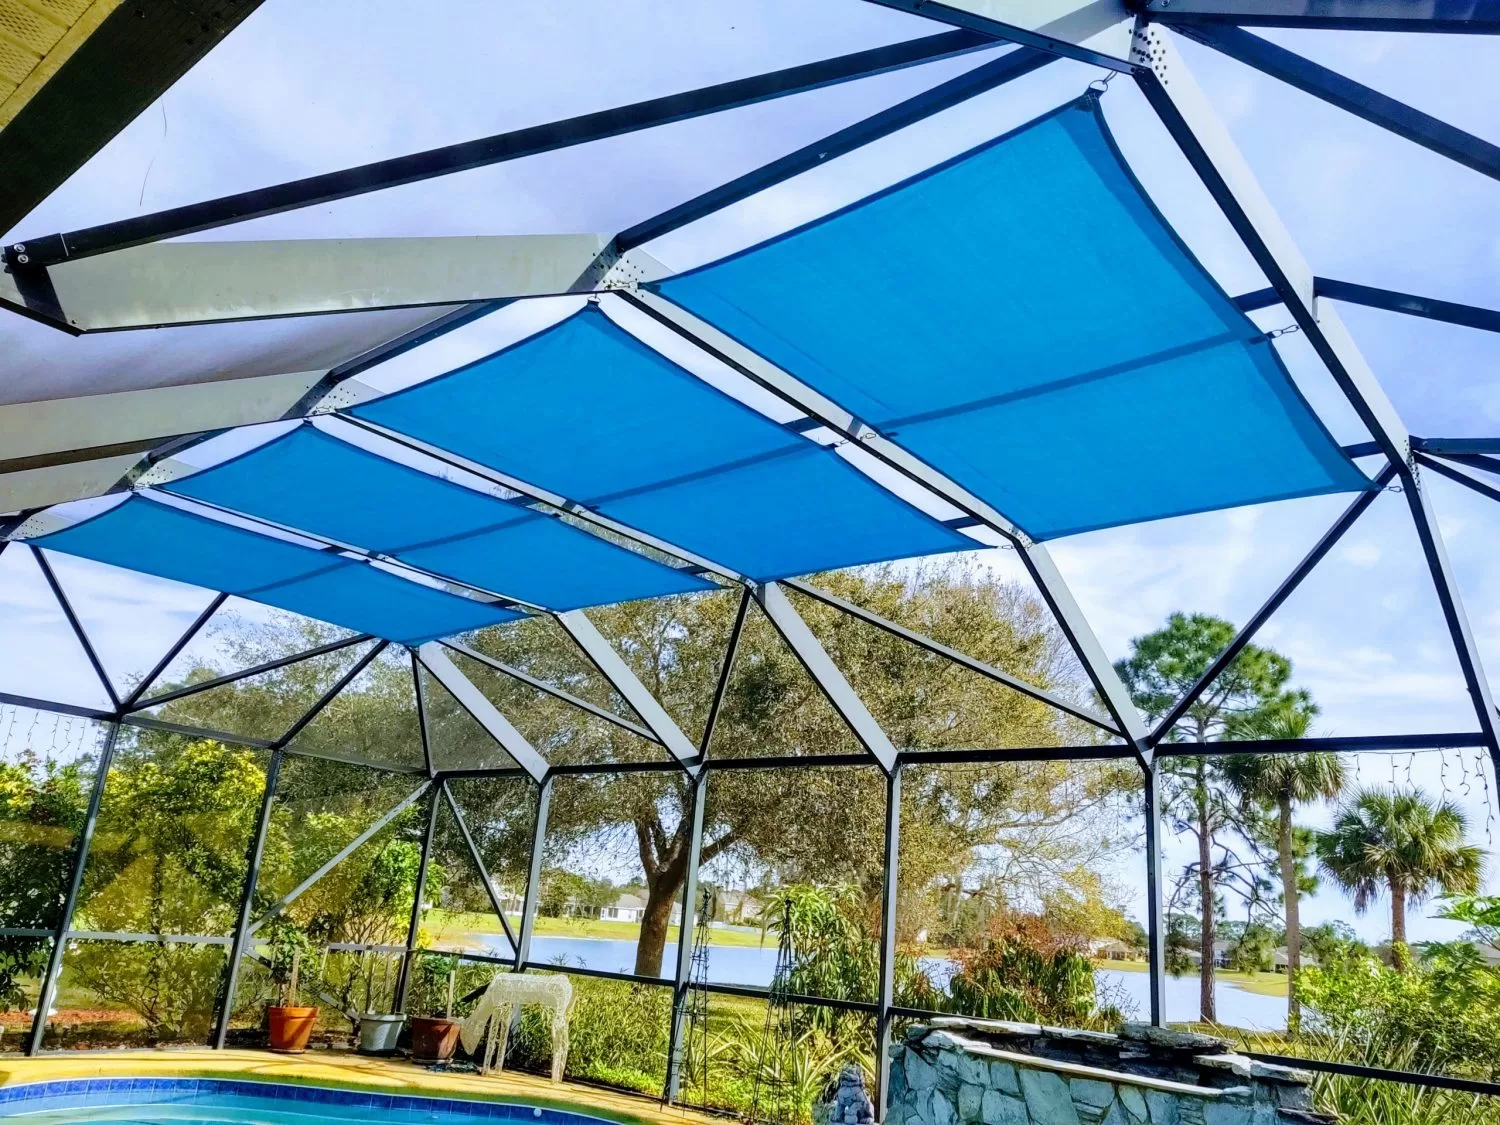 These bright blue shade sails add color and create a fun environment in the backyard.